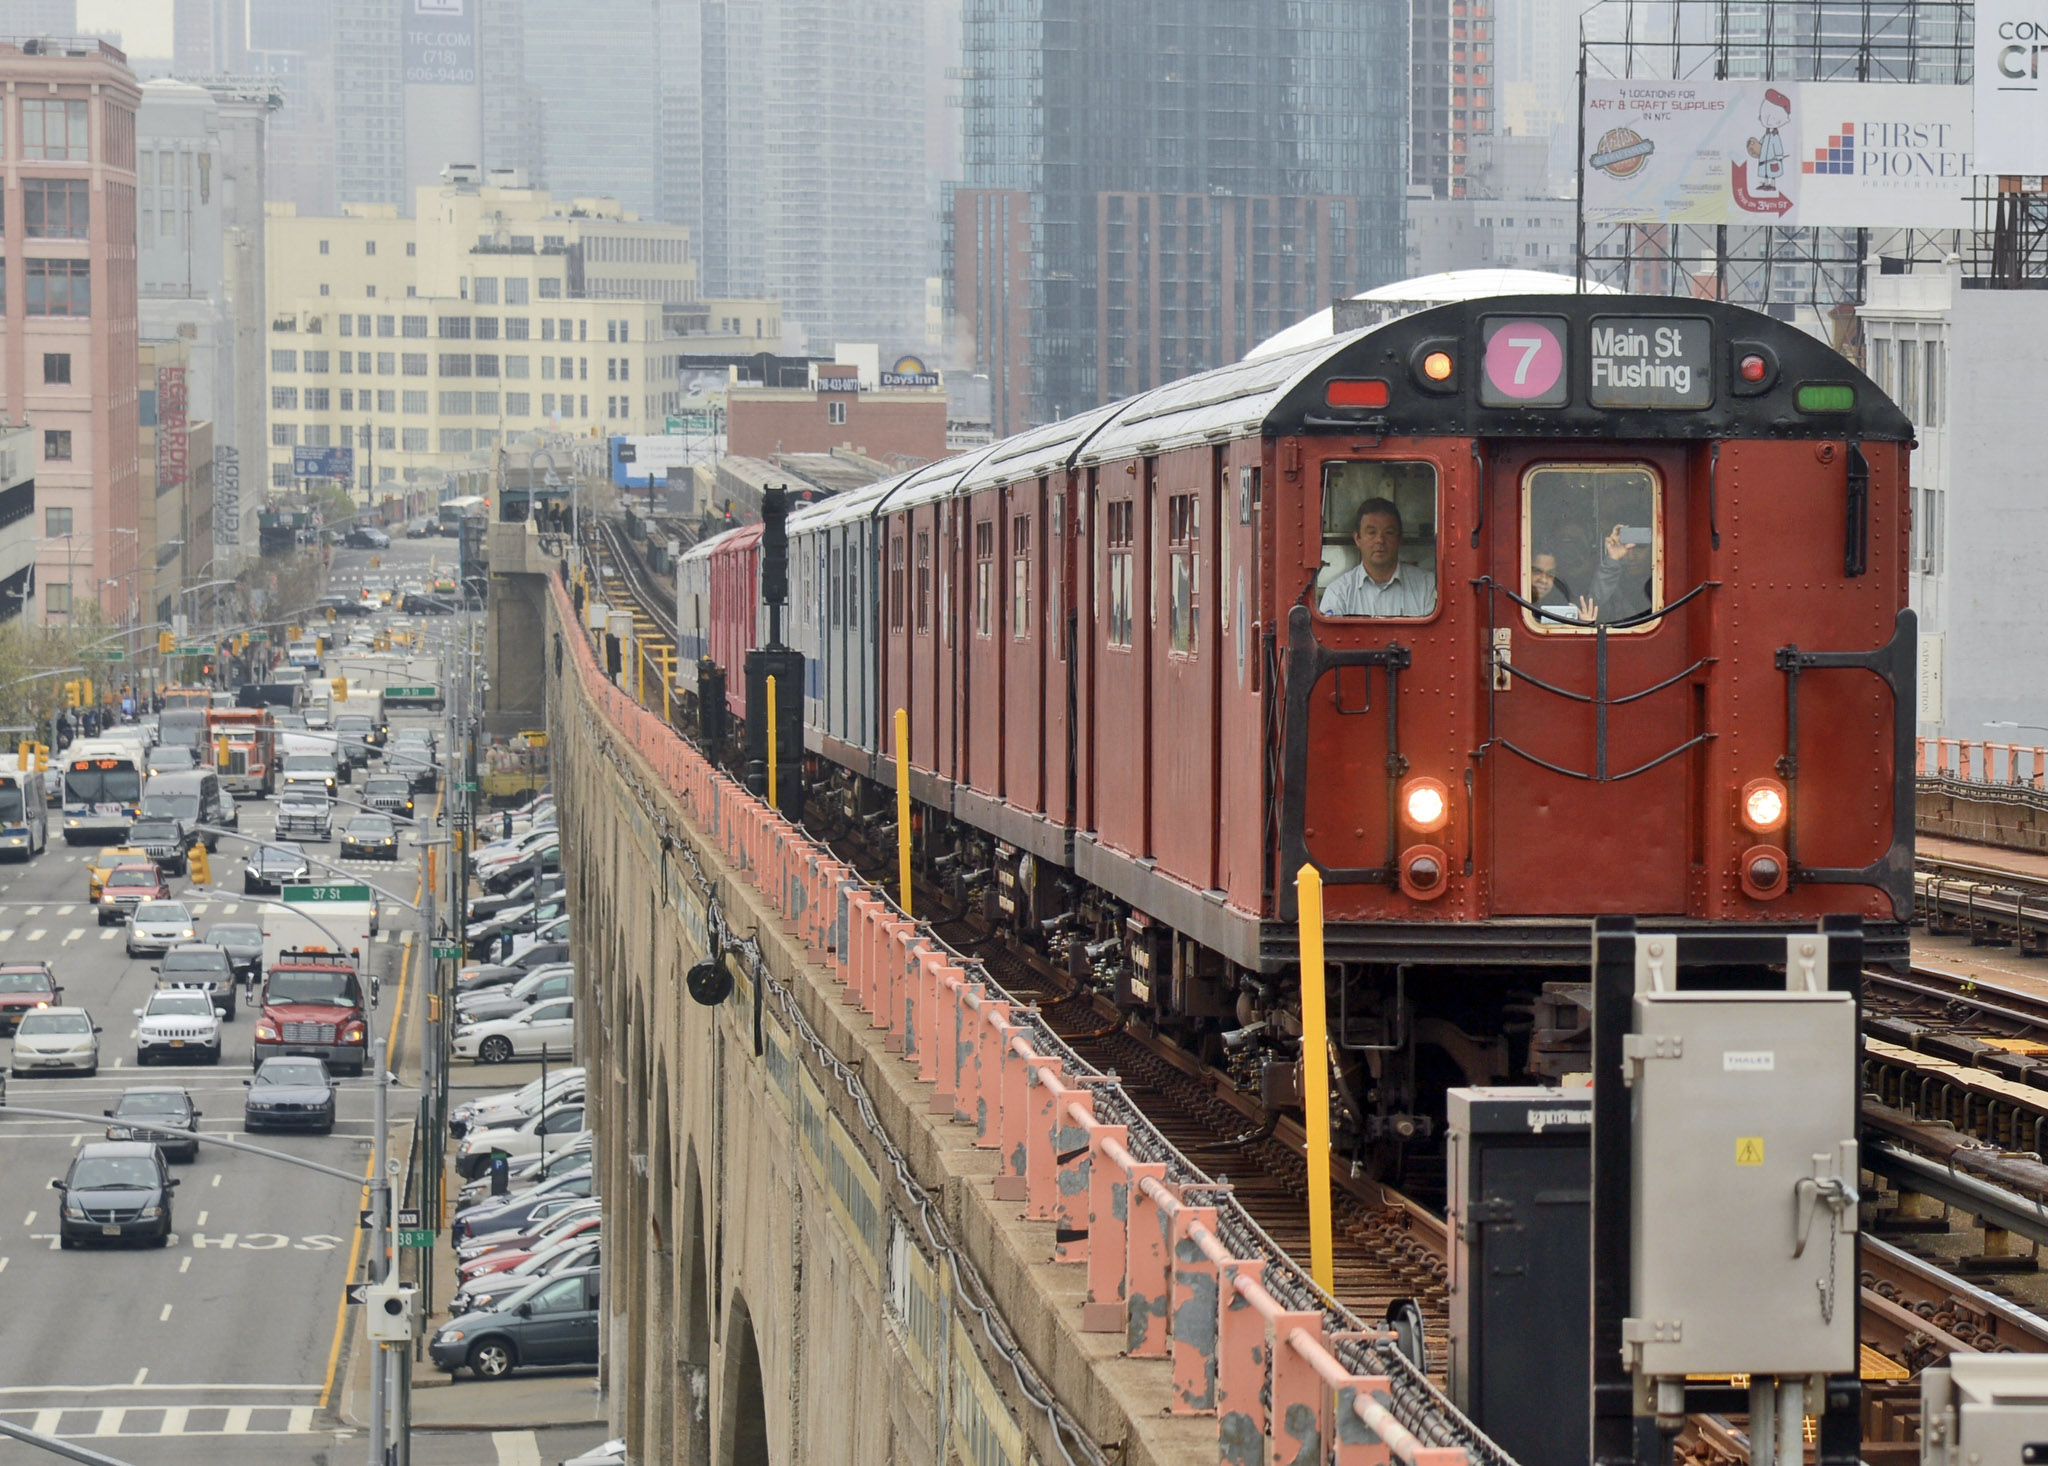 ICYMI: Holiday Nostalgia Rides are back! Take a ride back in time on the New York Transit Museum’s Train of Many Colors